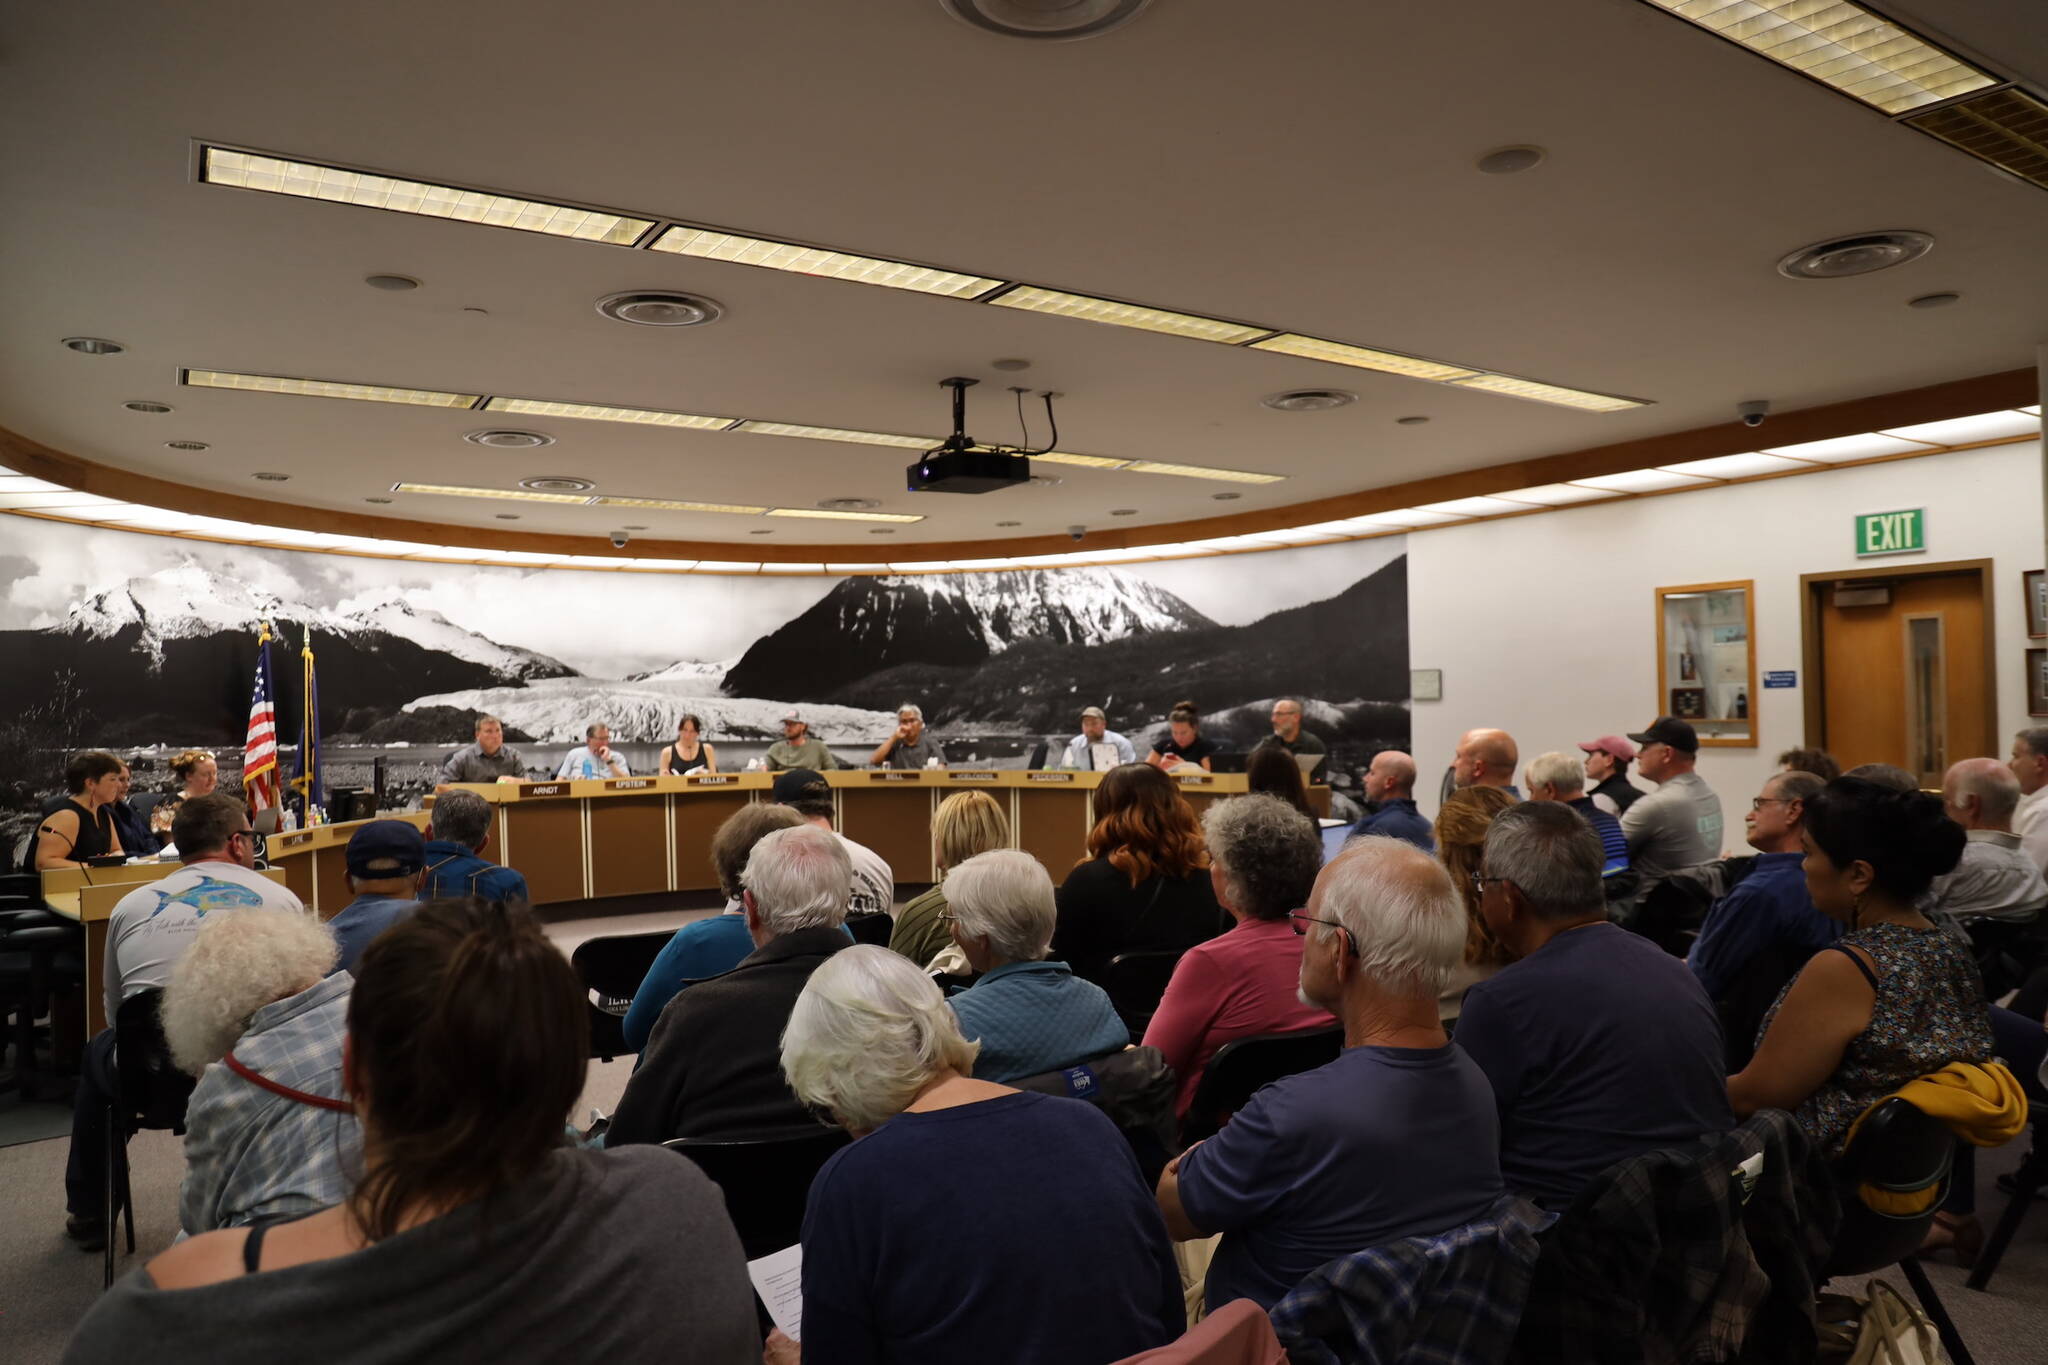 More than 40 people attended the City and Borough of Juneau Planning Commission meeting Tuesday night where a new downtown development project was approved for a conditional permit. (Clarise Larson / Juneau Empire)